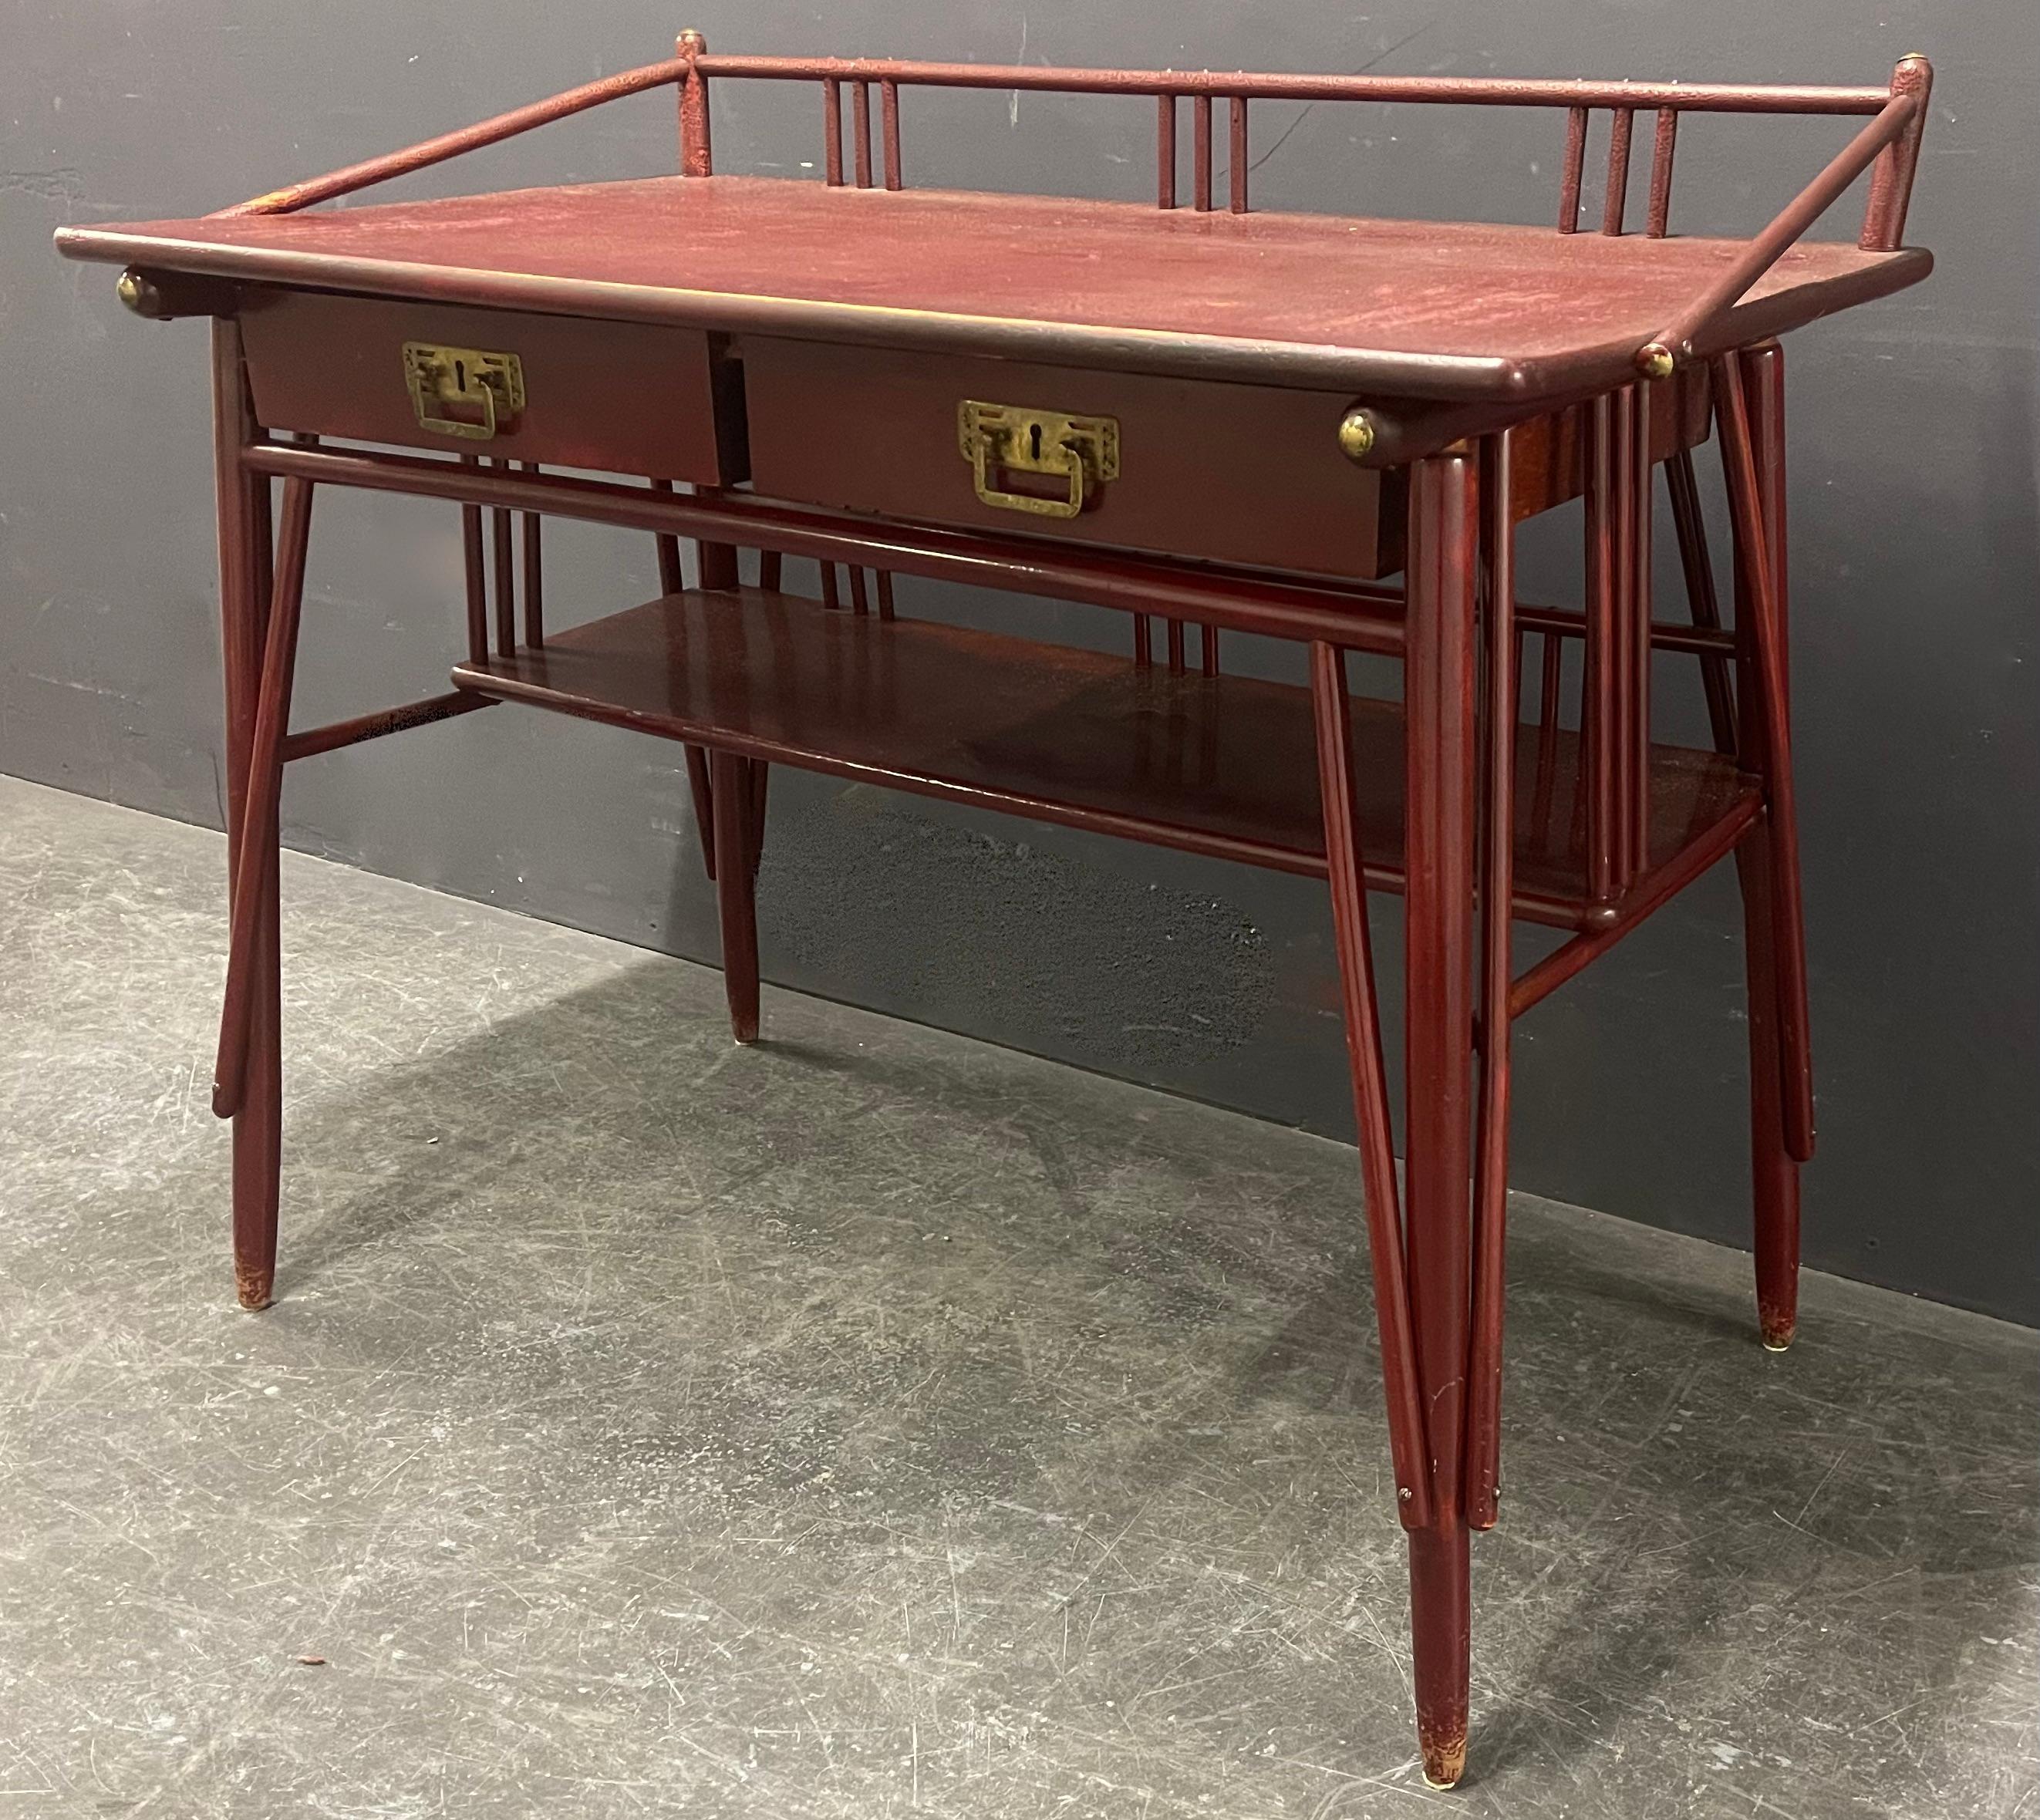 Early 20th Century Rare No.49 Art Nouveau Desk from Finland For Sale